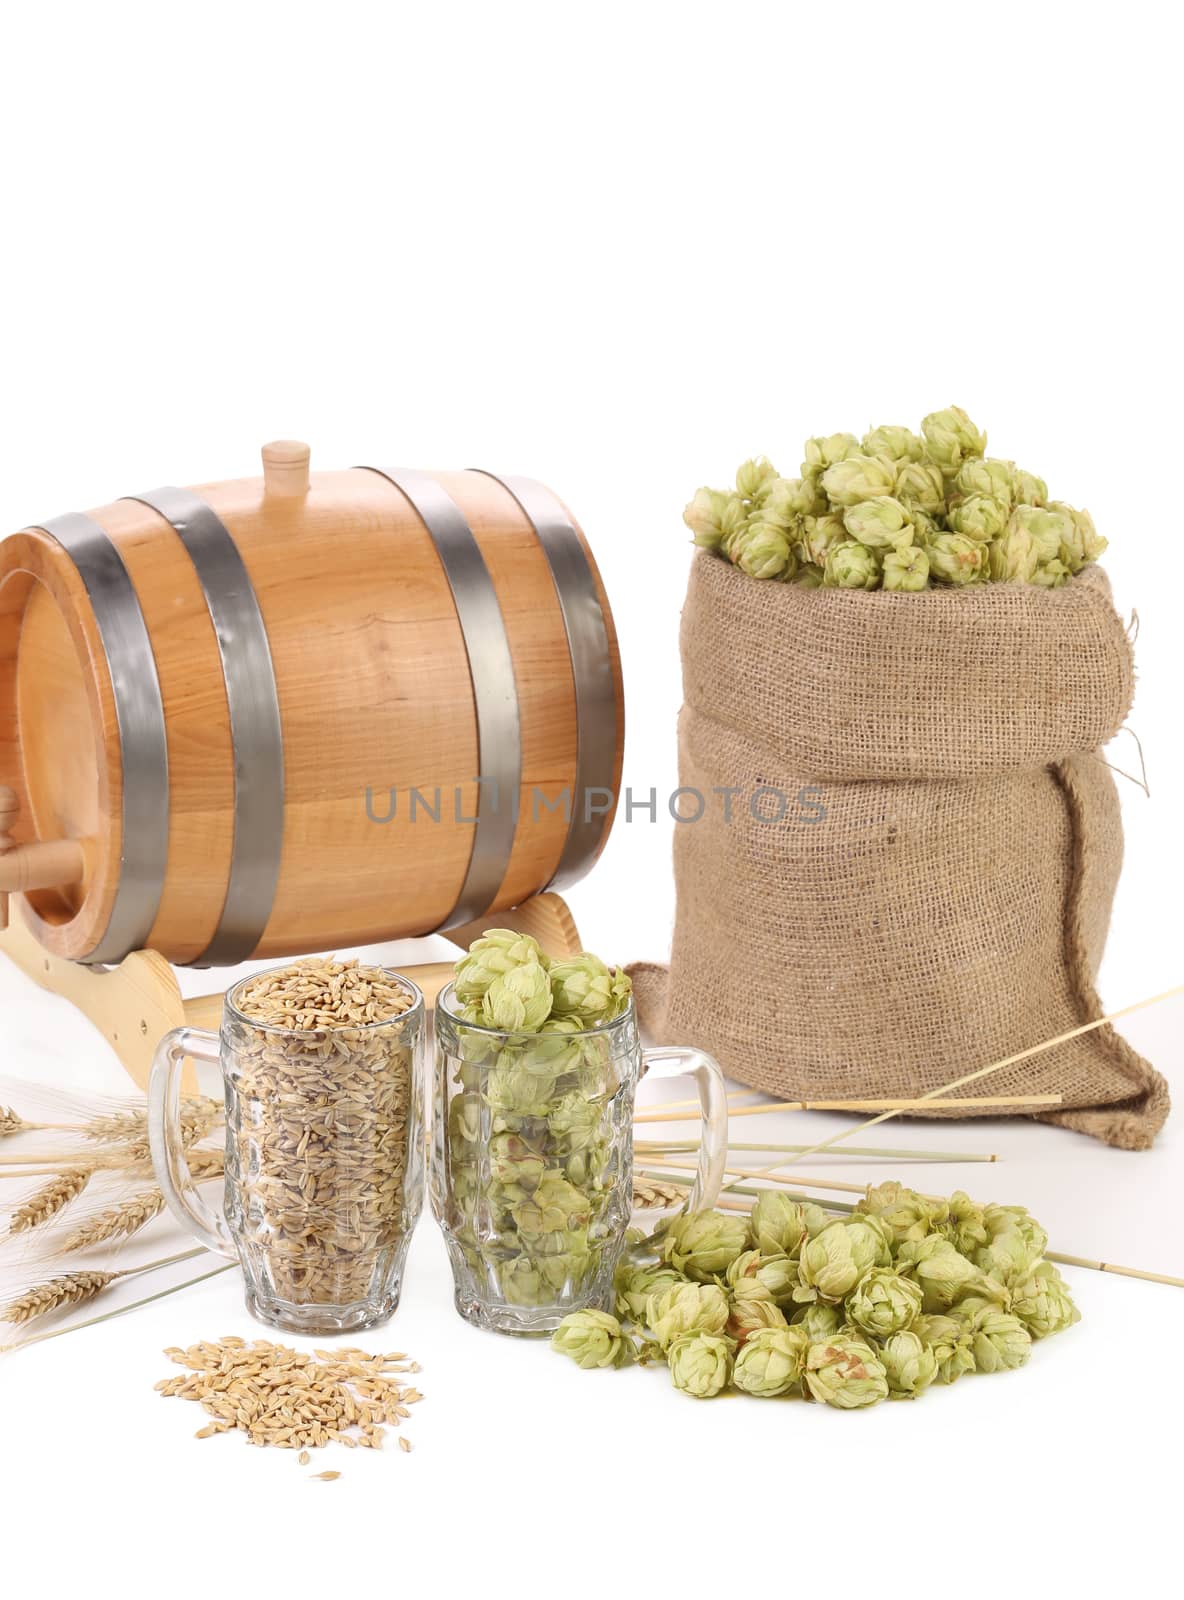 Two mugs with barley and hop. Isolated on a white background.